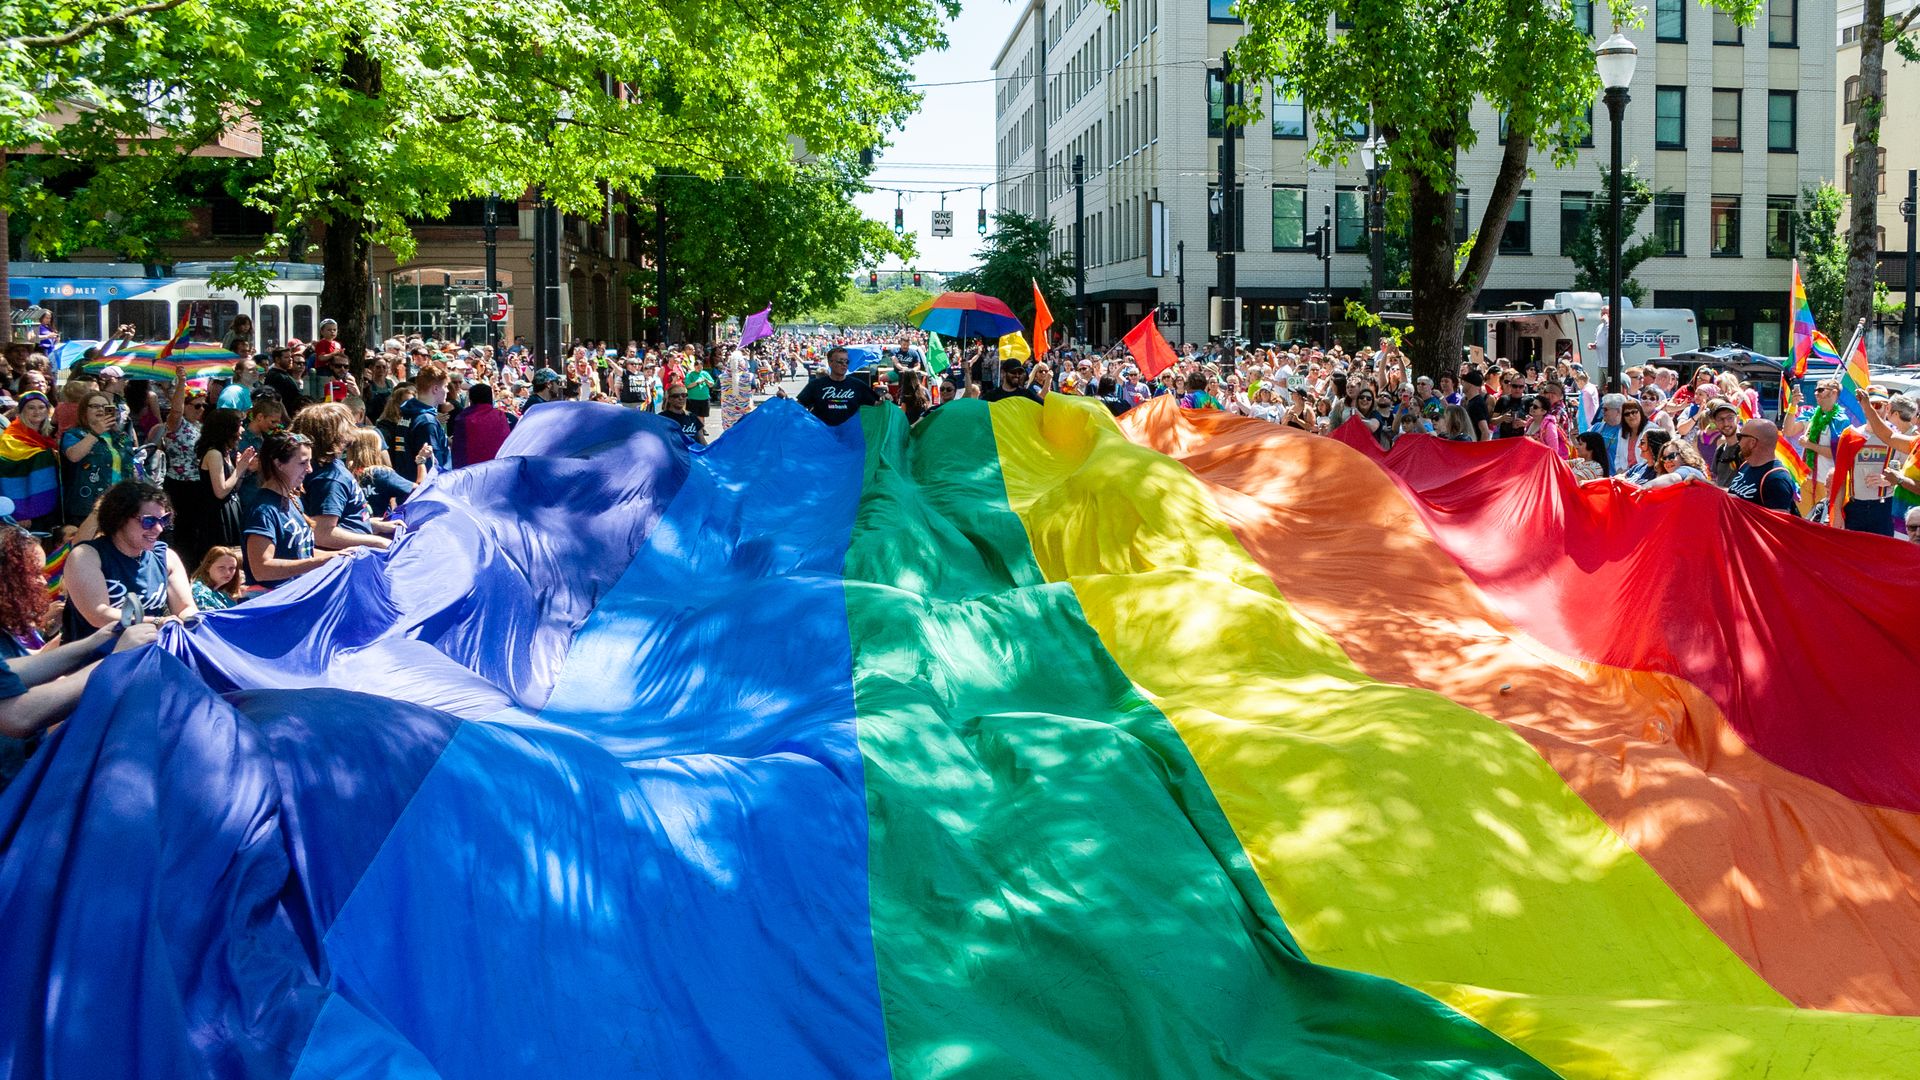 This image shows a large Pride flag being carried down a street.